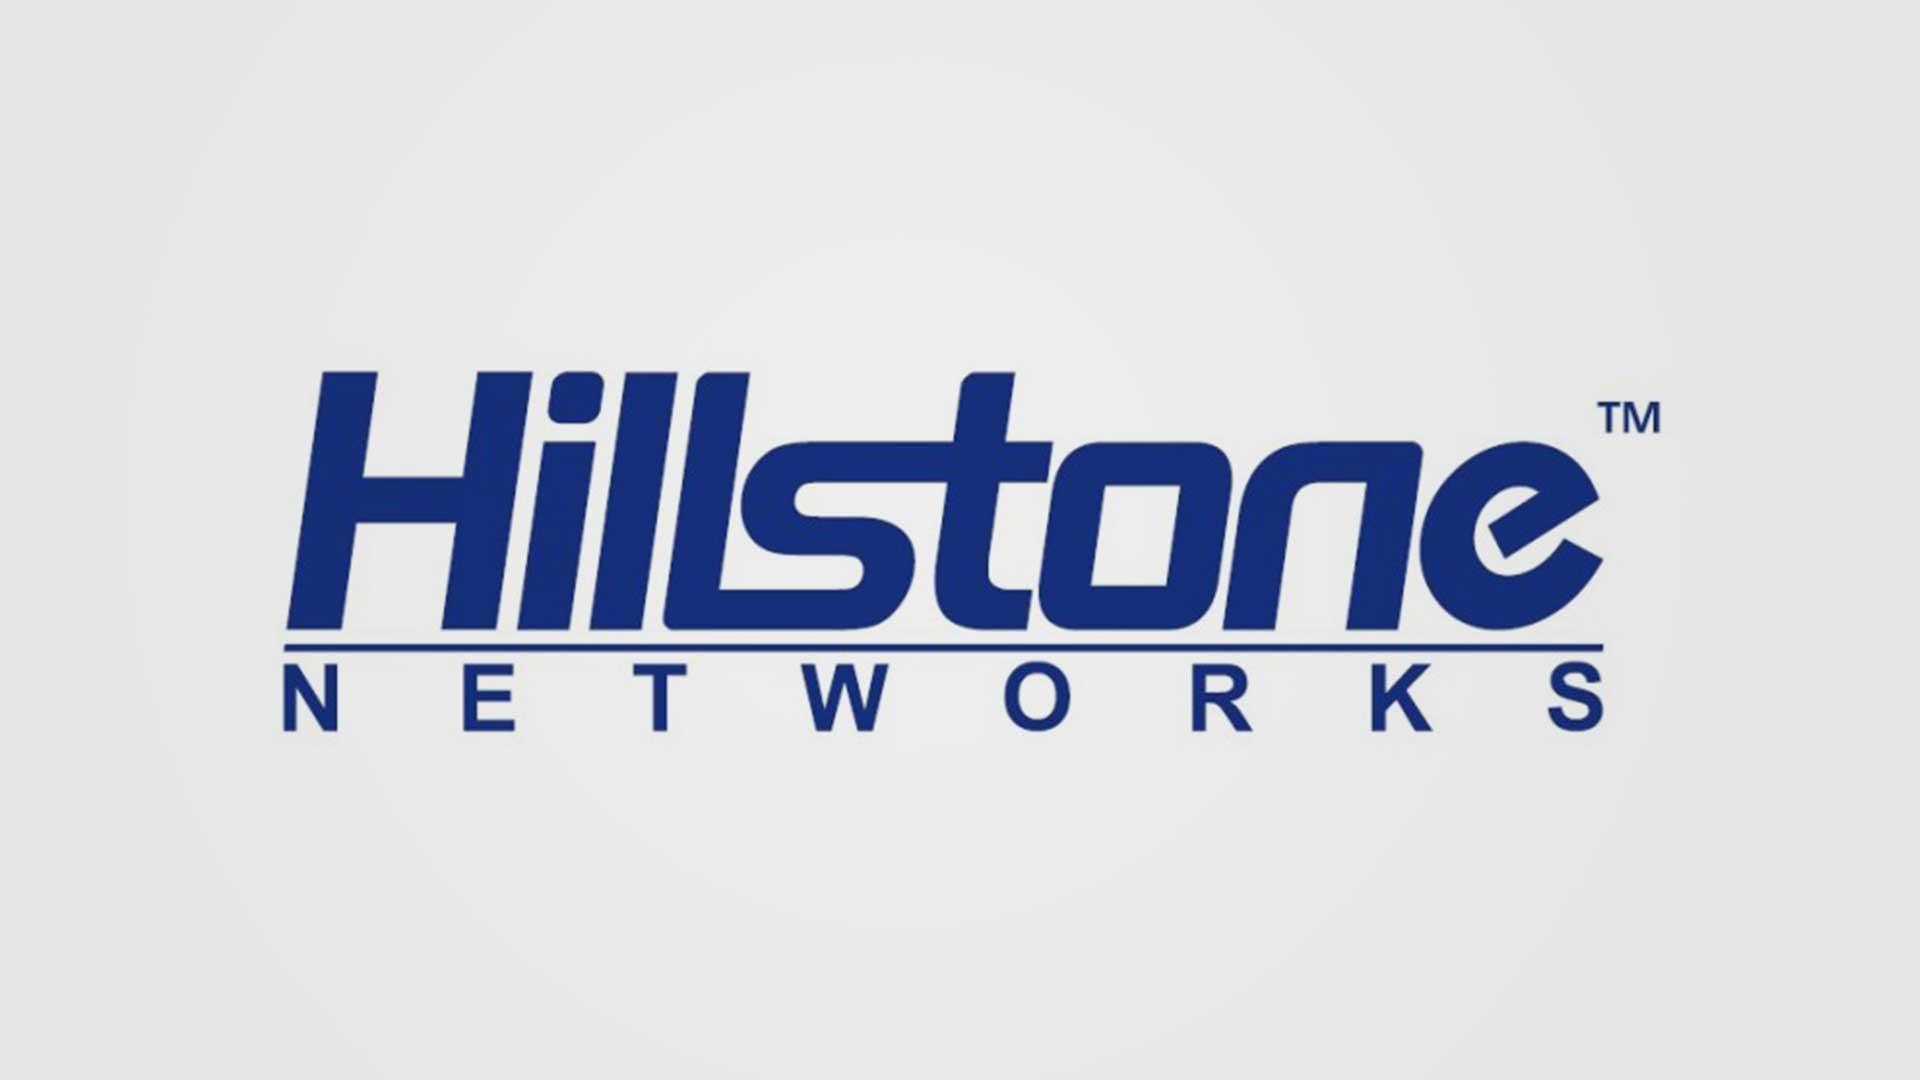 BDL Hillstone A200 1 ano NGFW BDL-A200-IN12 - Mega Market